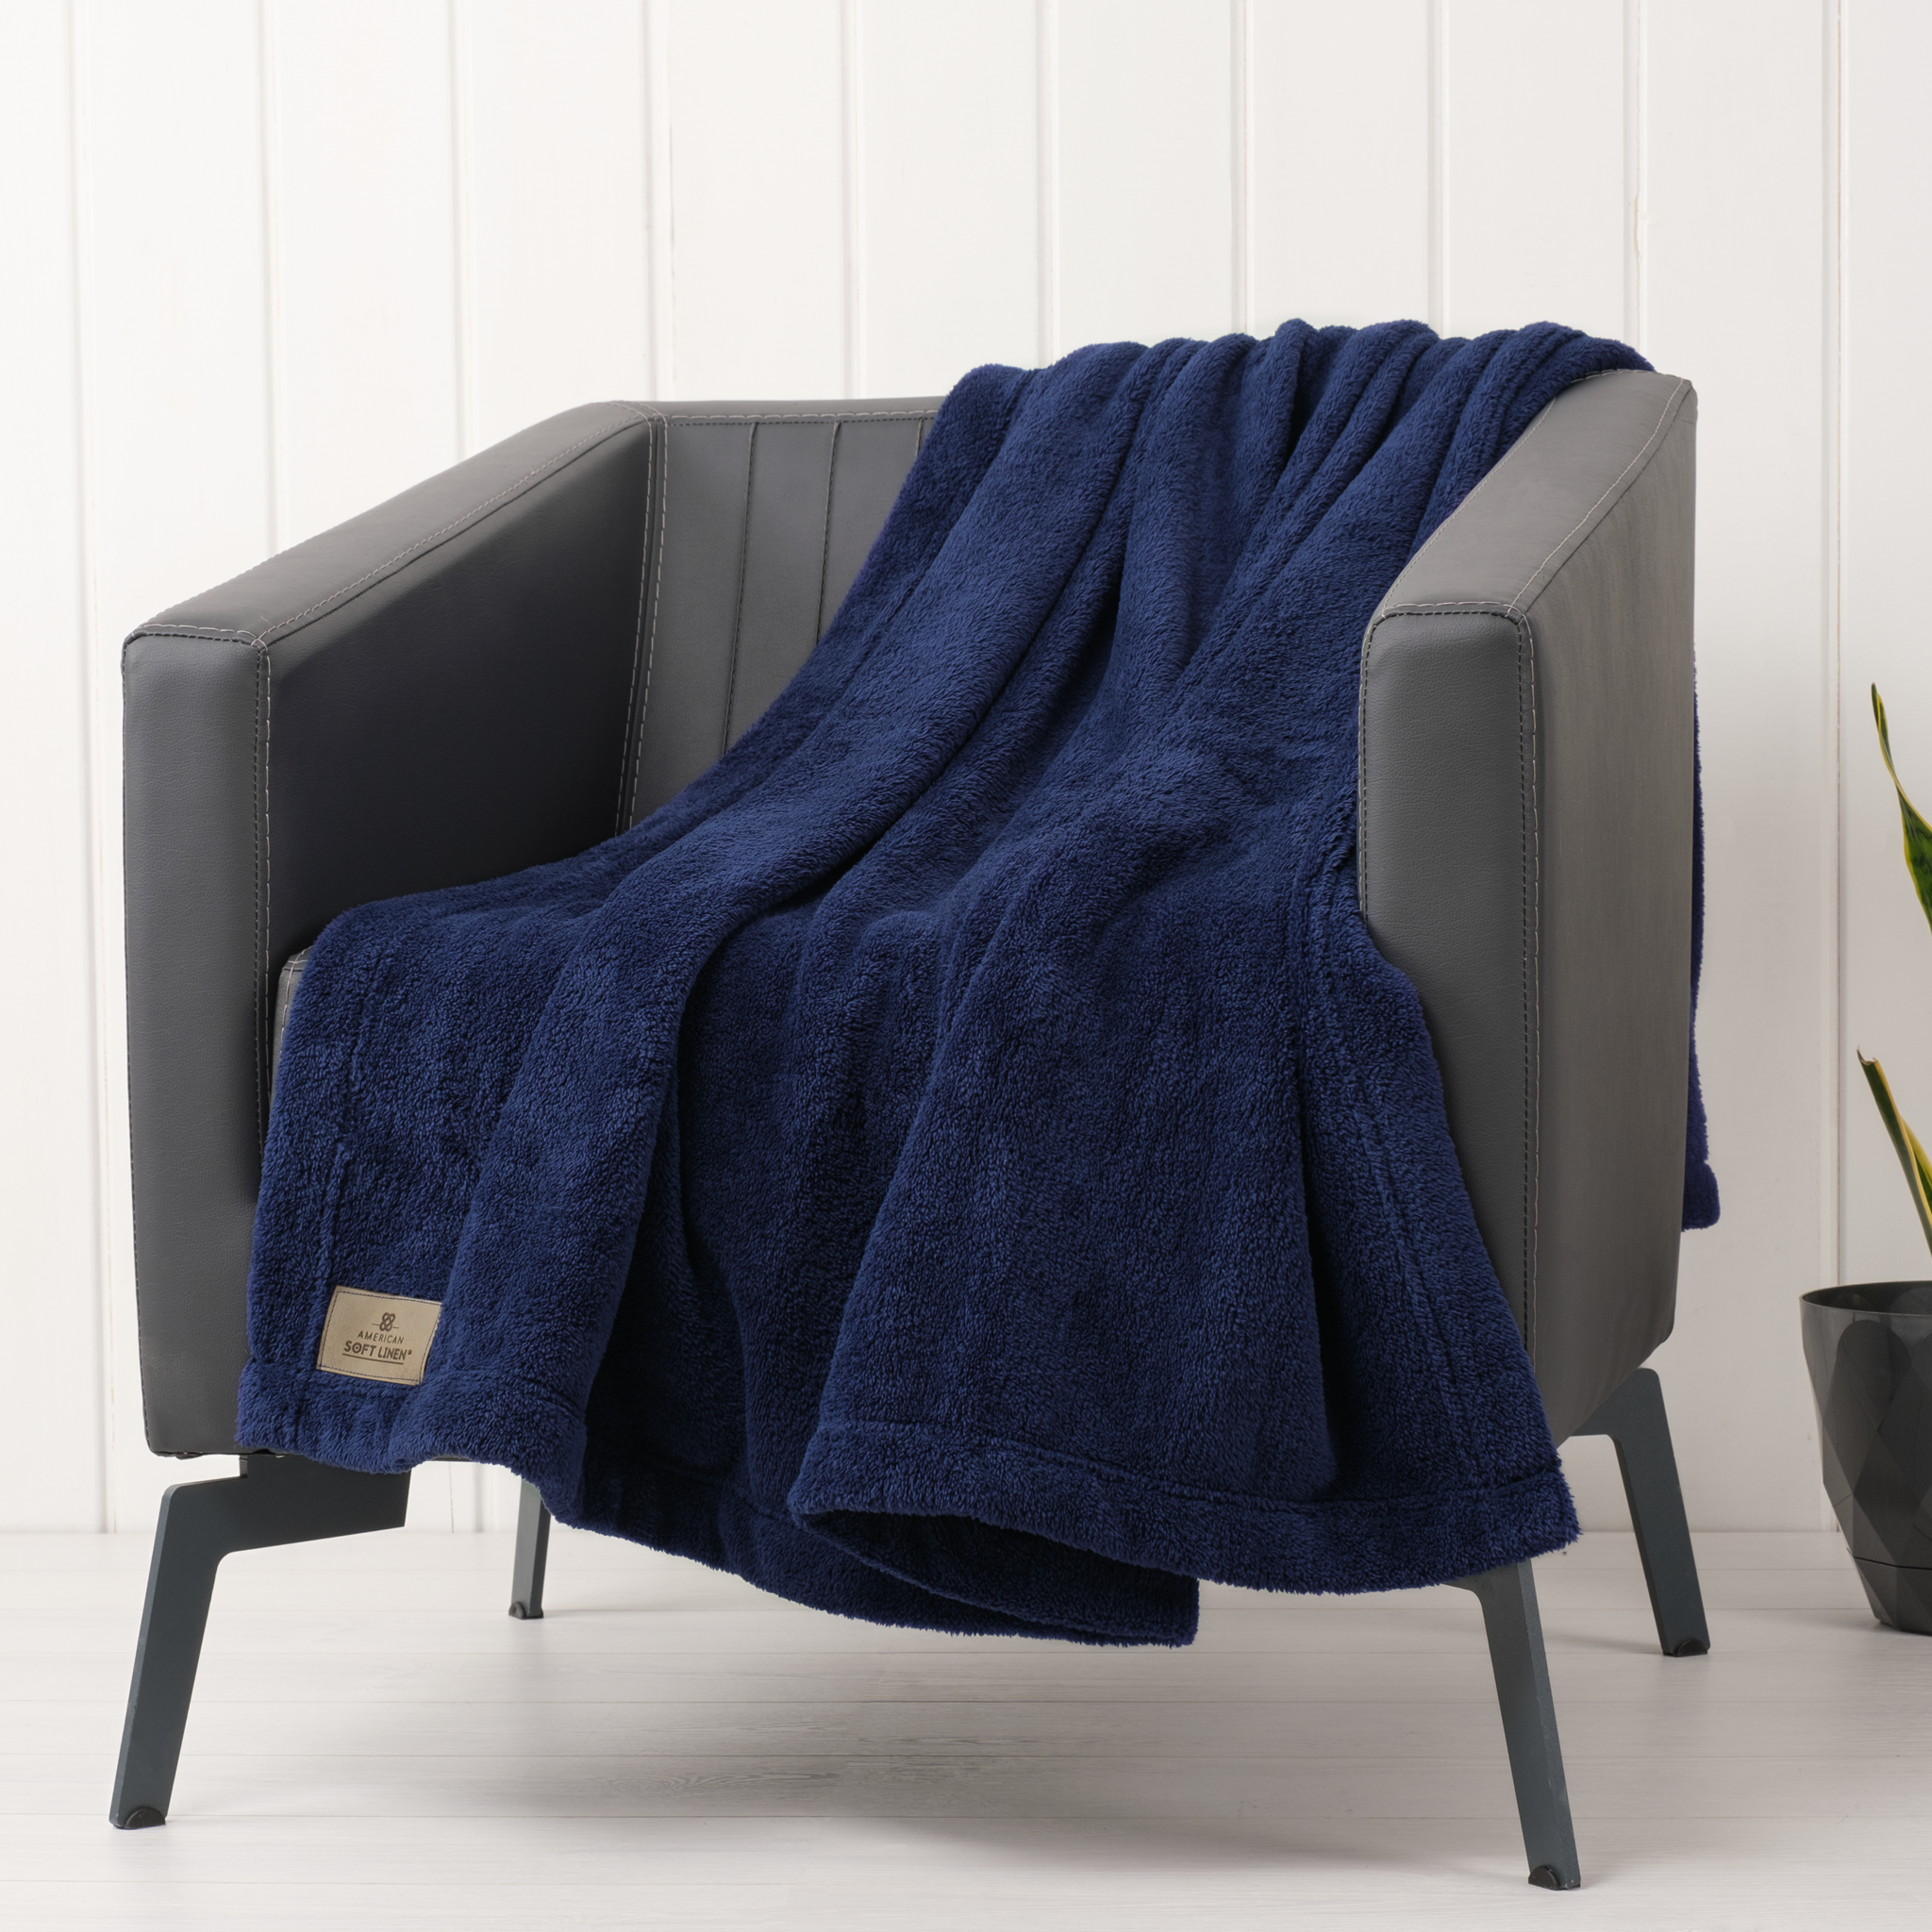 American Soft Linen - Bedding Fleece Blanket - Wholesale - 24 Set Case Pack - Throw Size 50x60 inches - Navy-Blue - 1